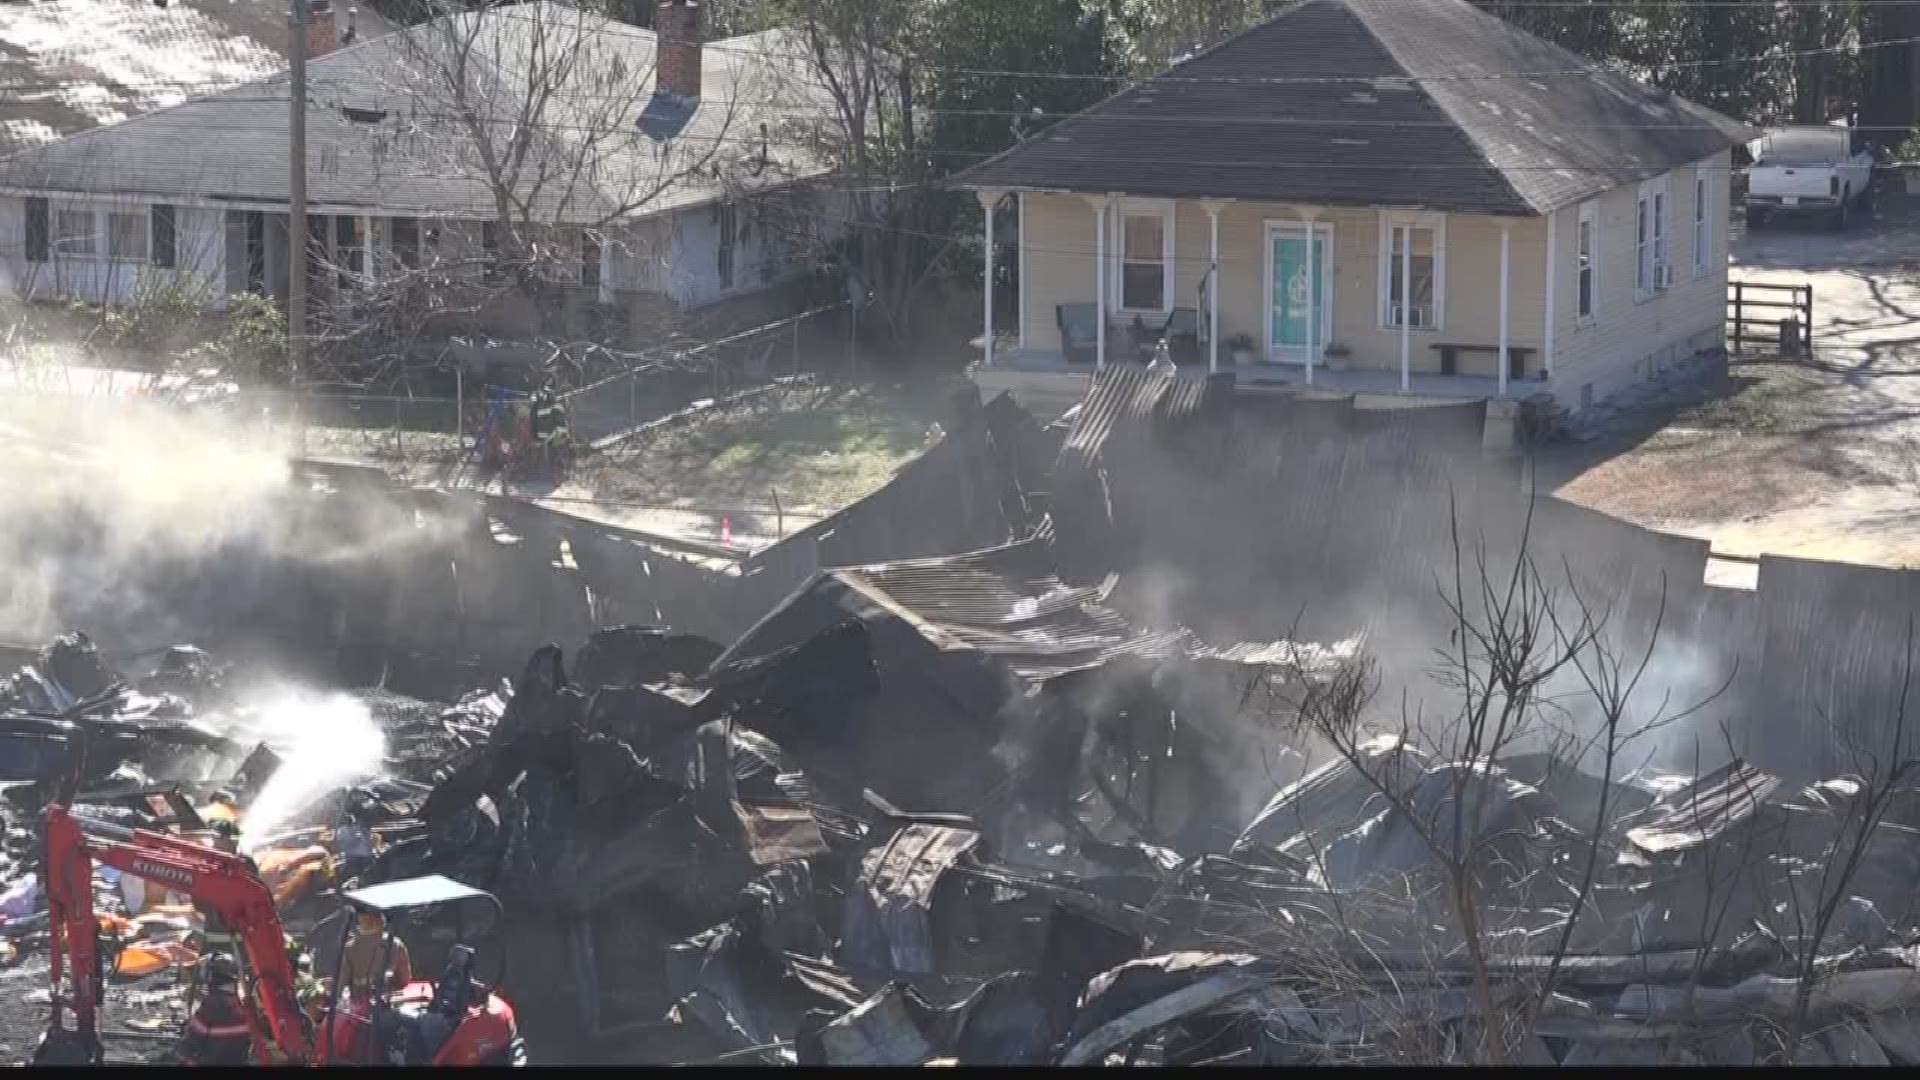 Neighbors talk about the fire at the Sumter warehouse